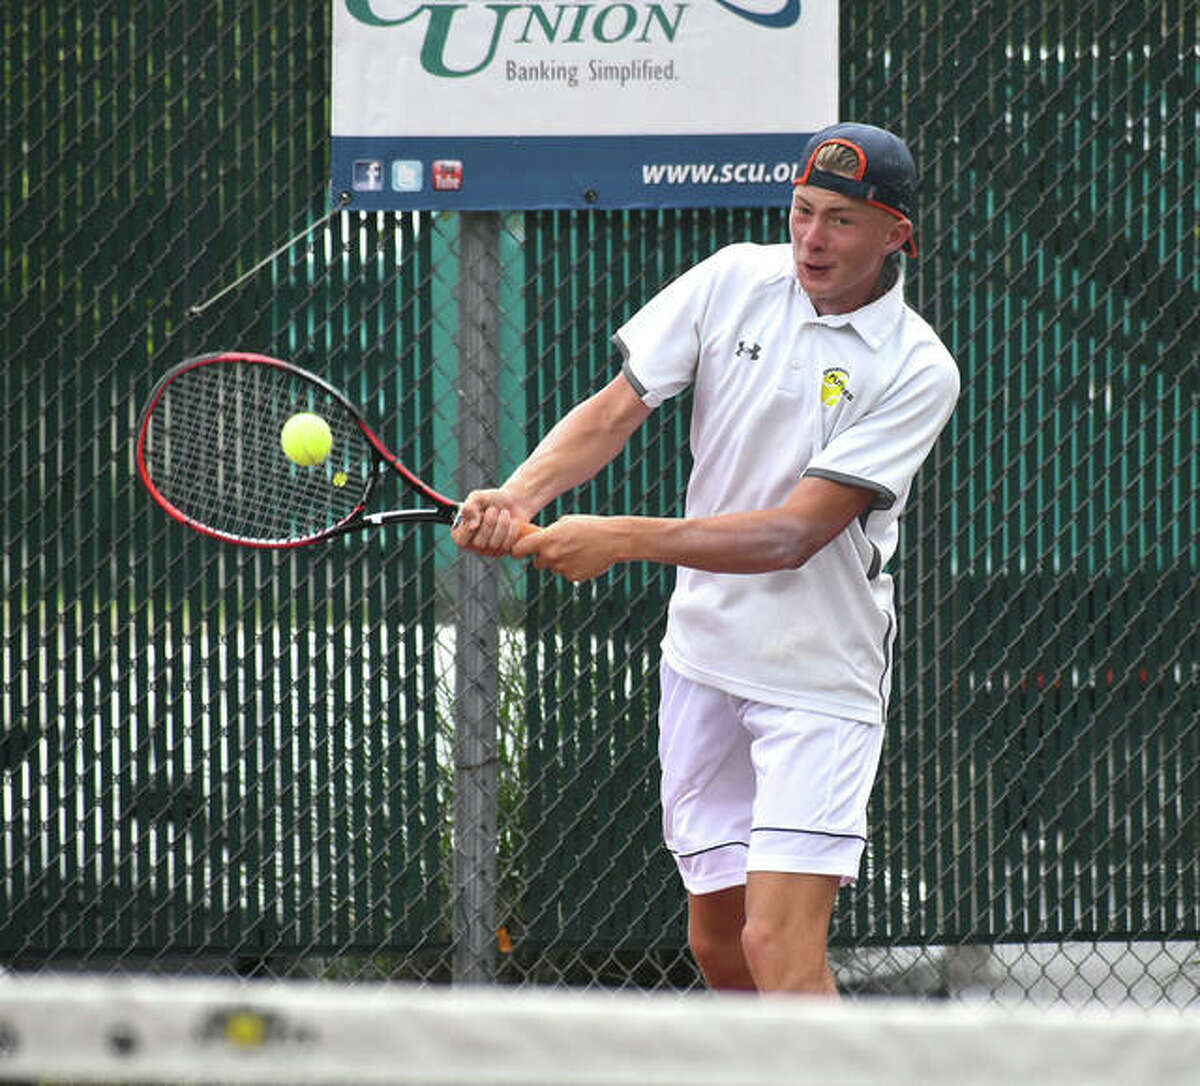 Edwardsville’s Colton Hulme hits a backhand shot during his second-round match against University of Illinois All-American Siphos Montsi at the Edwardsville Wild Card Tournament on Thursday.